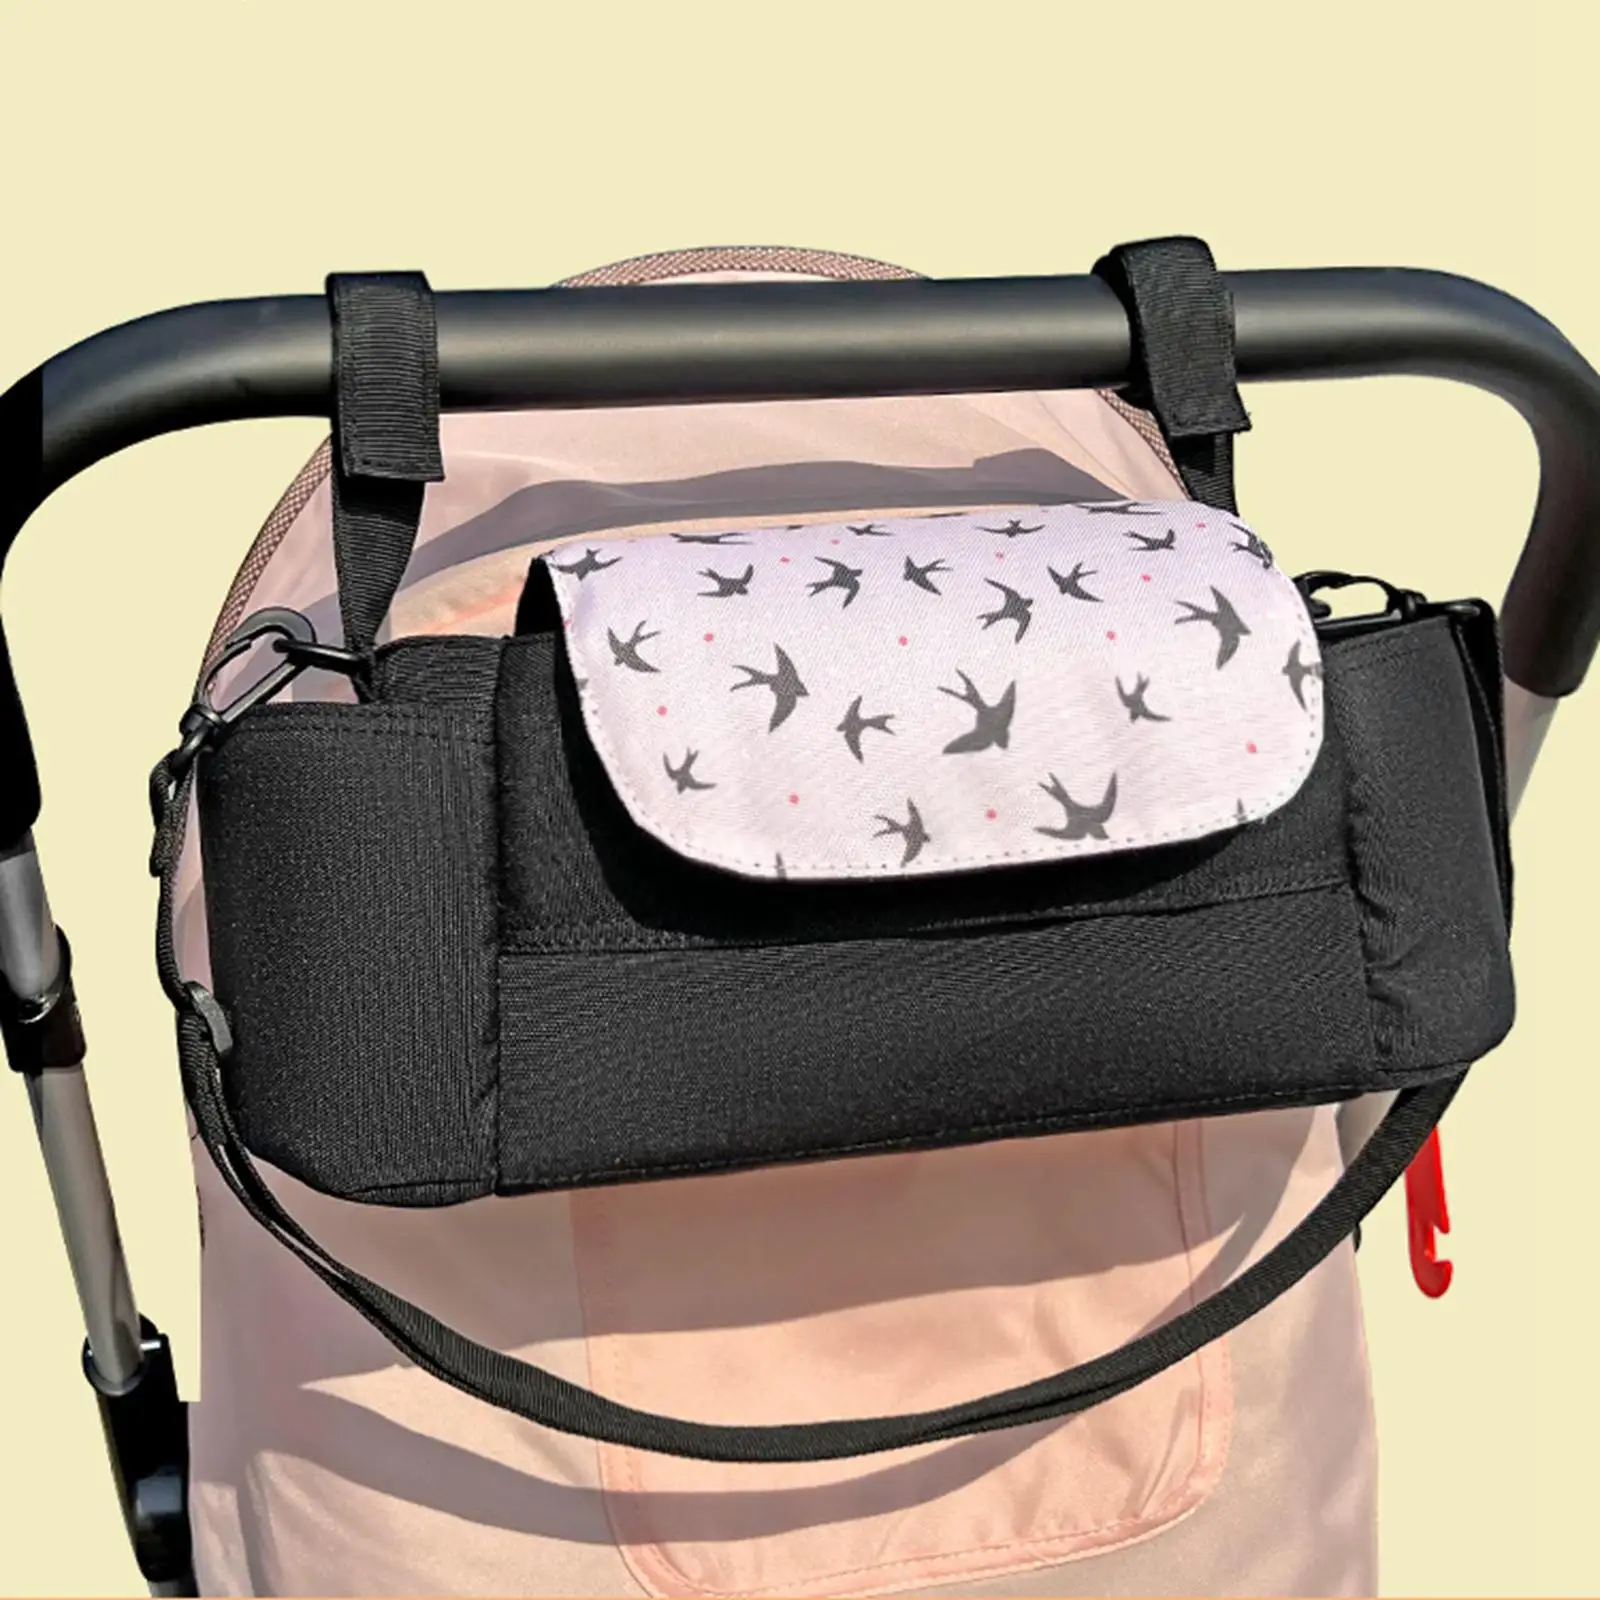 Multifunctional Stroller Organizer Bag Portable Diaper Bag Oxford Cloth and cup Holder Waterproof for Baby  Pushchair Pram Baby